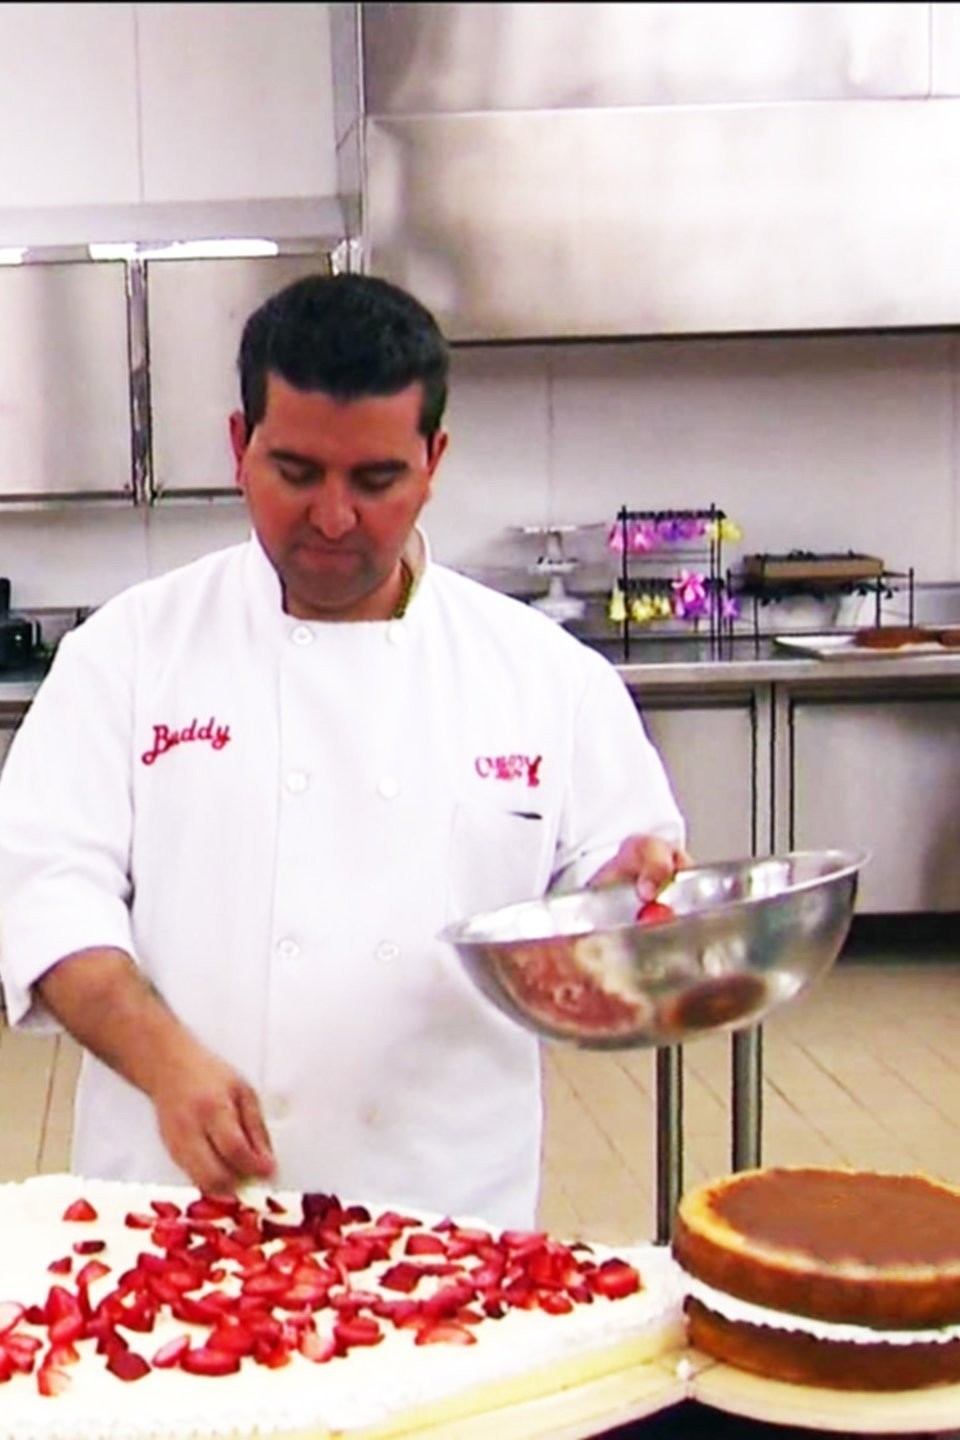 The Best Episodes of Cake Boss | All Episodes Ranked